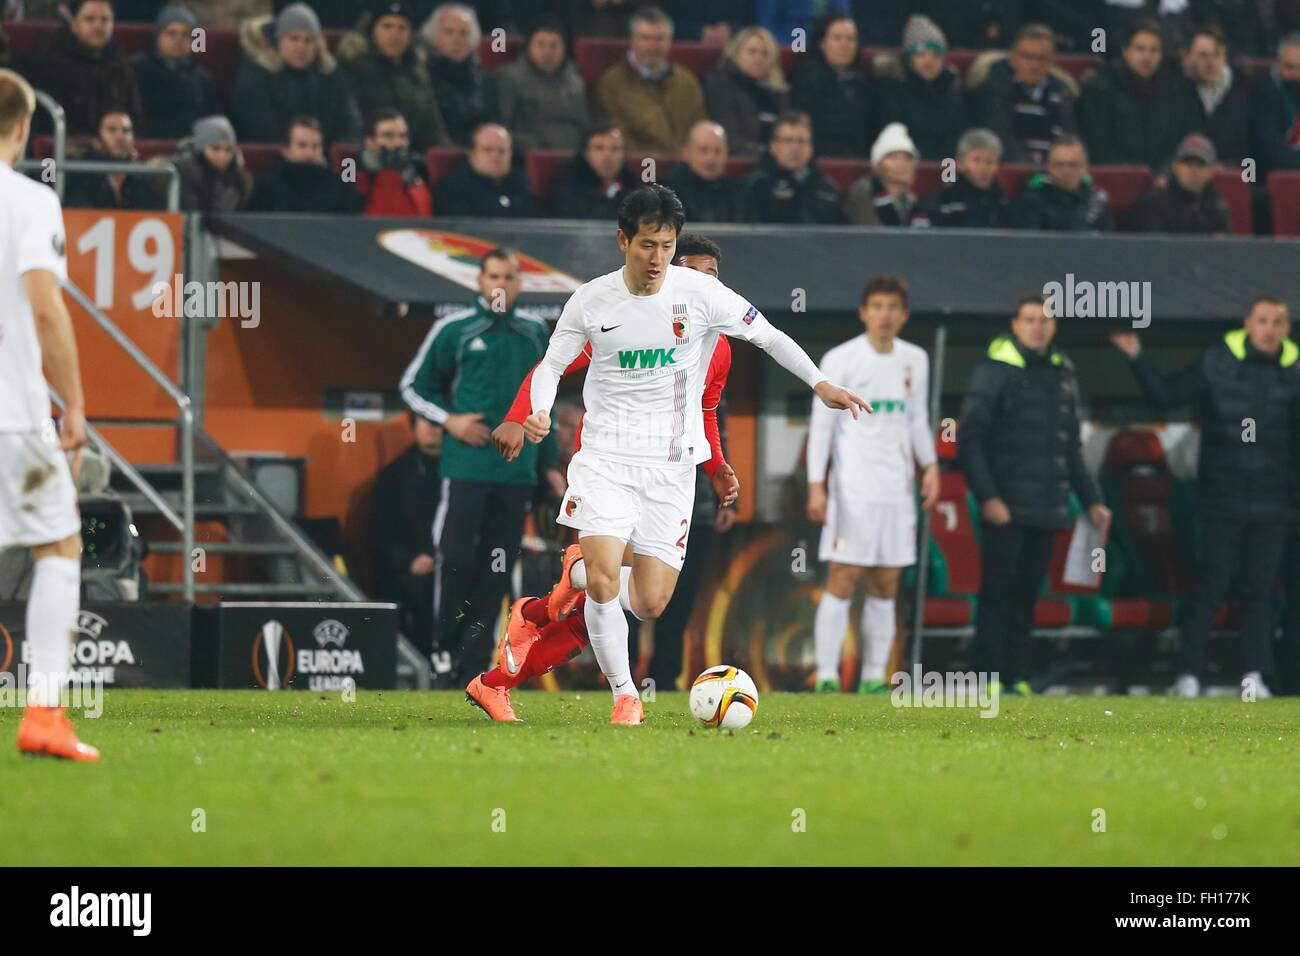 Germany. 18th Feb, 2015. Ji Dong-won (Augsburg), FEBRUARY 18, 2015 - Football/Soccer : UEFA Europa League Round of 32 match between FC Augsburg 0-0 Liverpool FC at the Augsburg Arena in Augsburg in Germany. © Mutsu Kawamori/AFLO/Alamy Live News Stock Photo